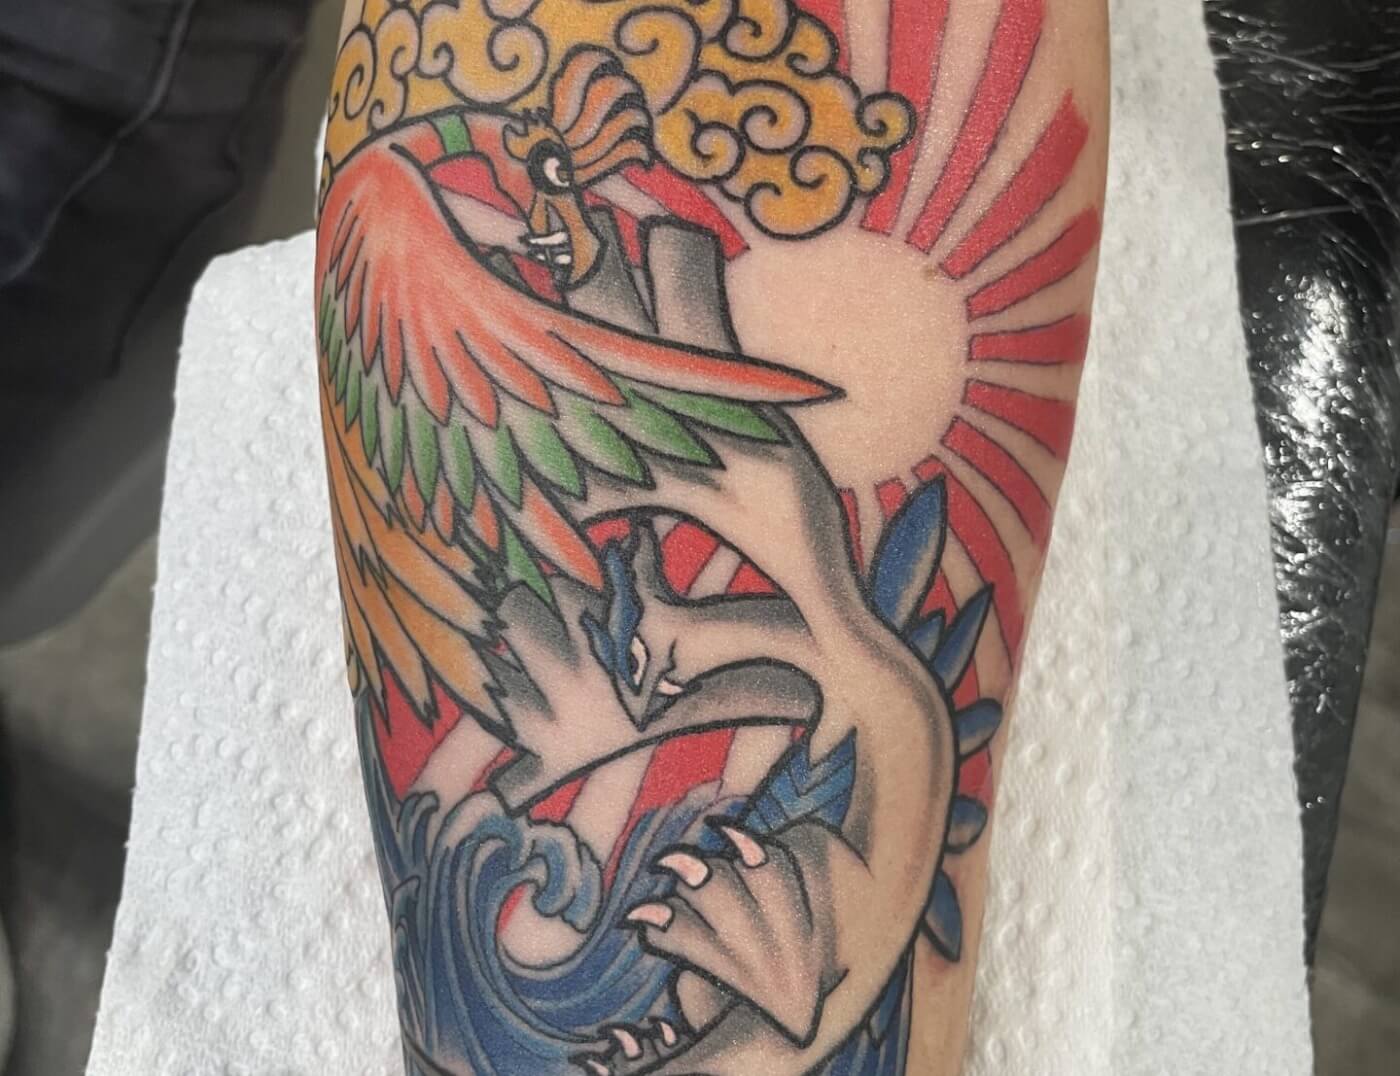 American traditional tattoo inked by Lyric TheArtist at Iron Palm Tattoos & Body Piercing in downtown Atlanta. (Castleberry art district). Walk-Ins are welcome. Call 404-973-7828 or stop by for a free consultation.